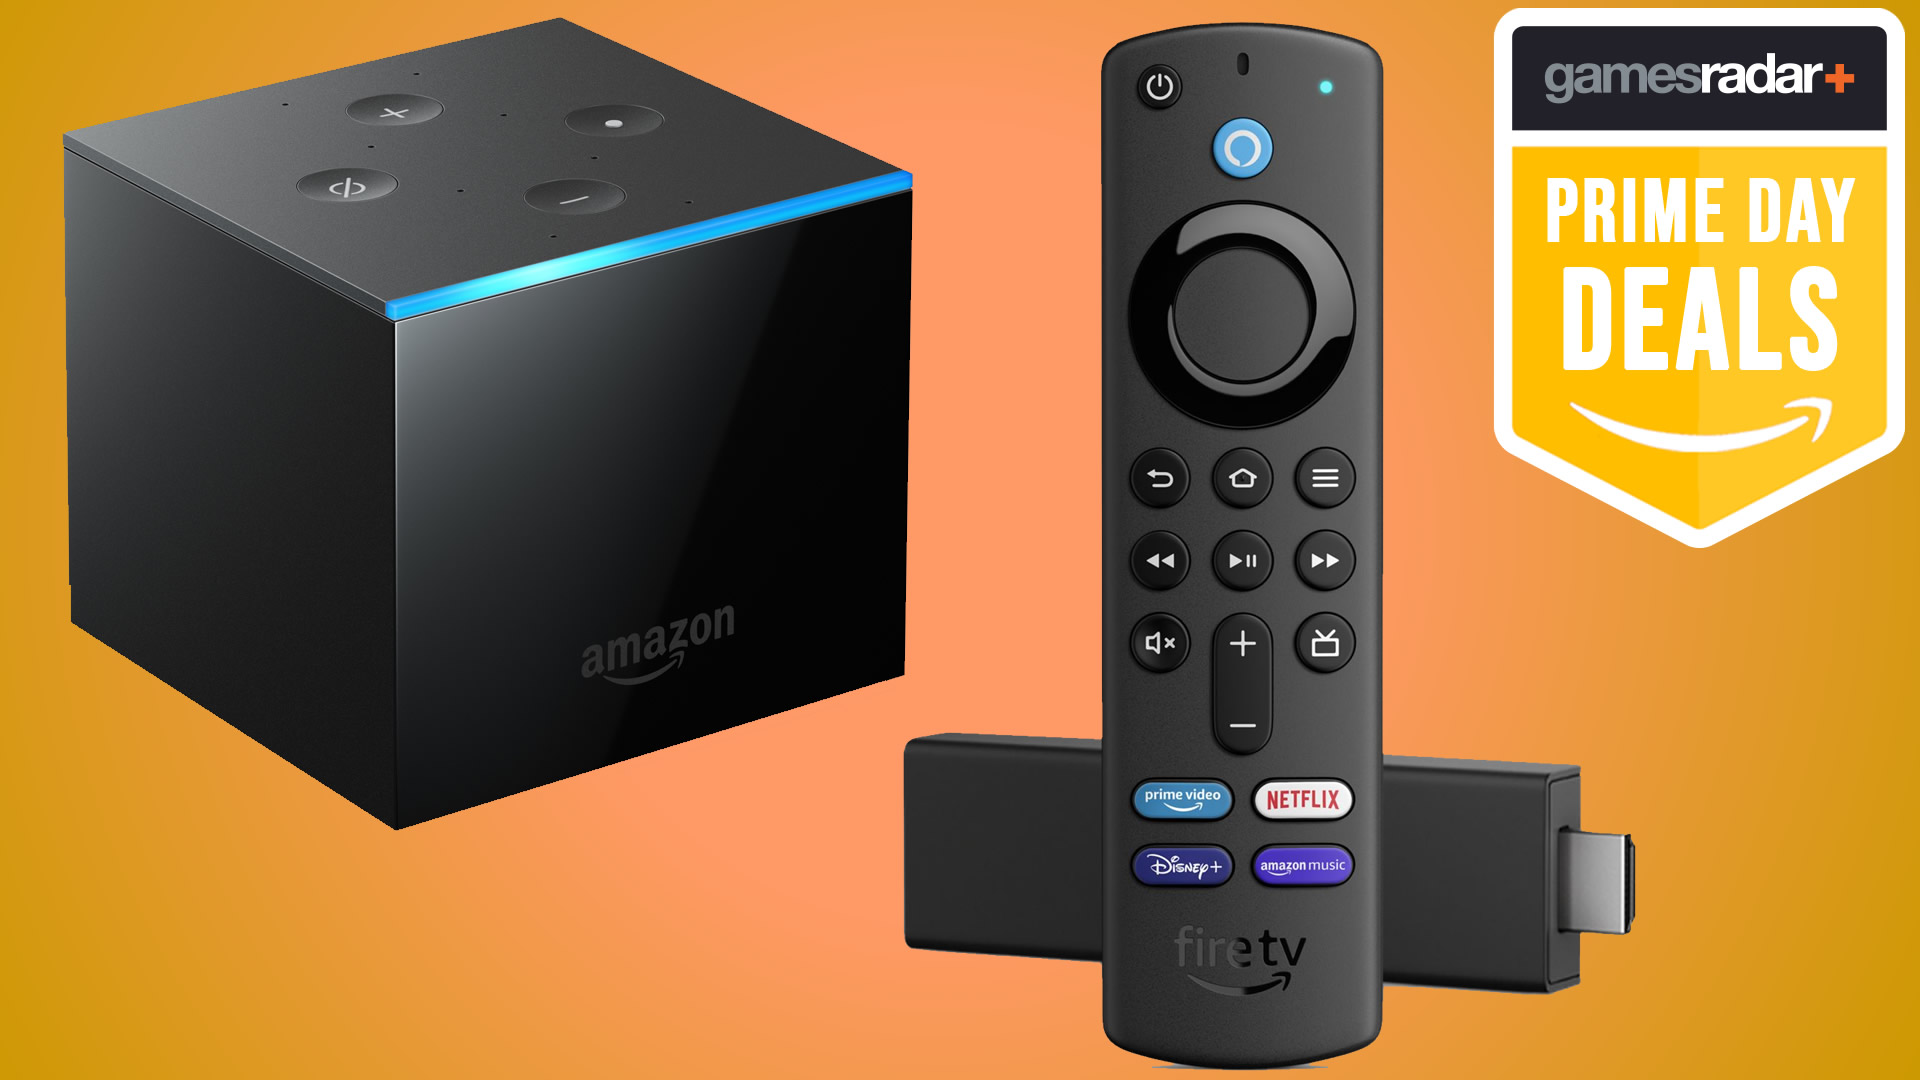 The Fire TV Stick 4K Is Back to All-Time Low of $25 With This